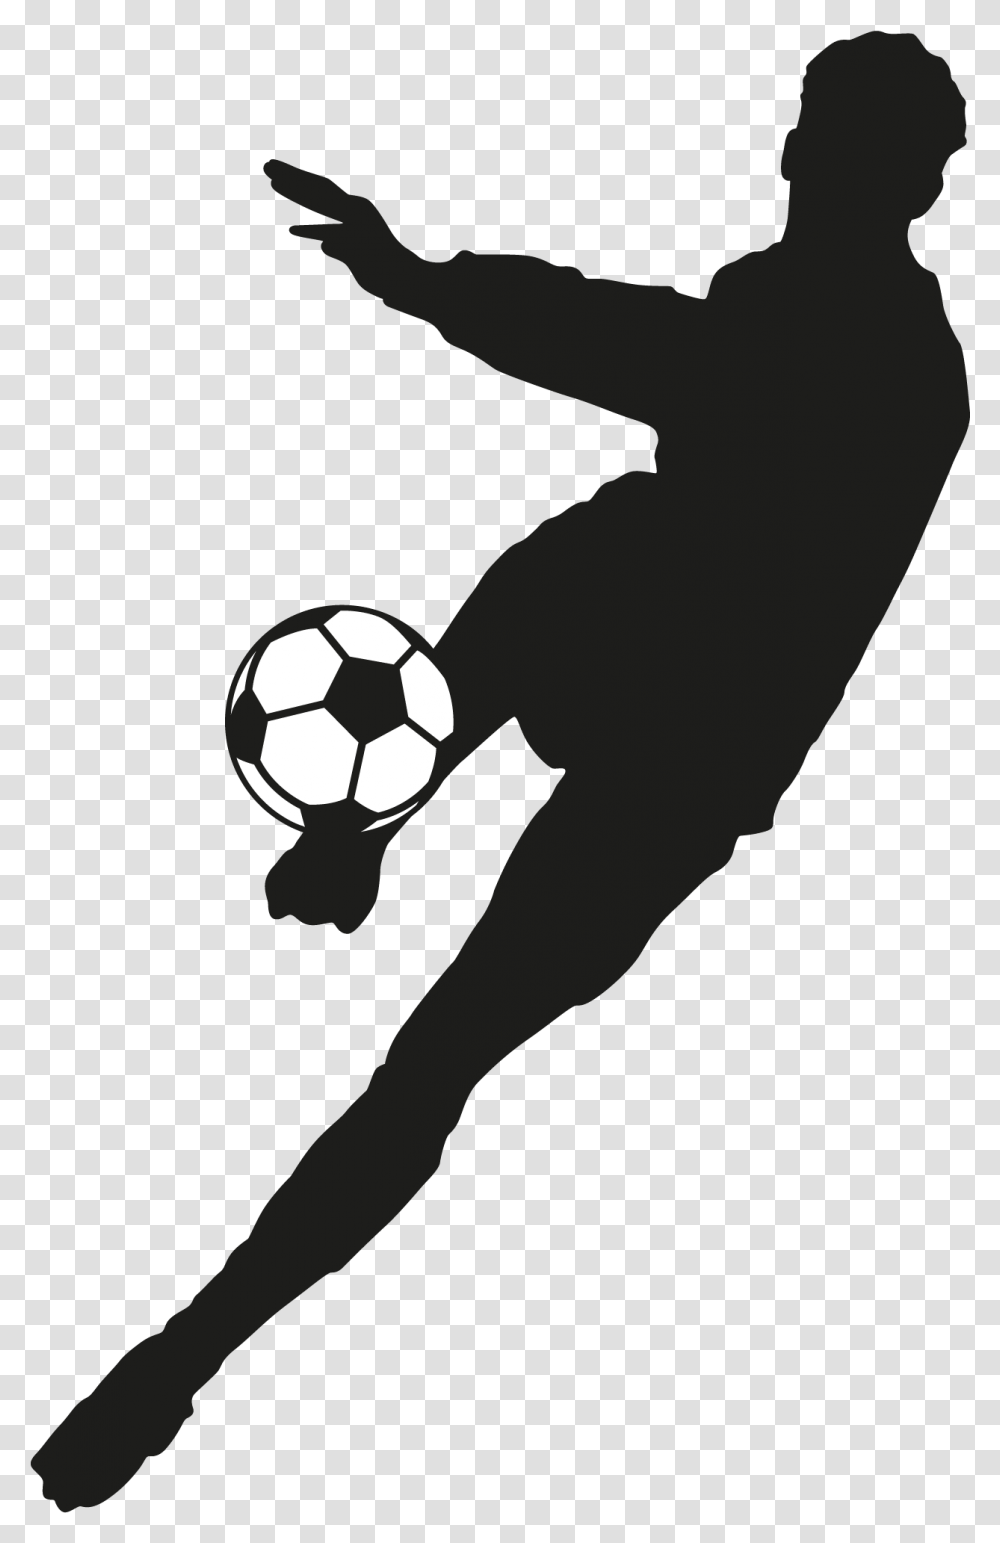 Football Player Silhouette Silhouette Football Players, Person, Human, People, Soccer Ball Transparent Png